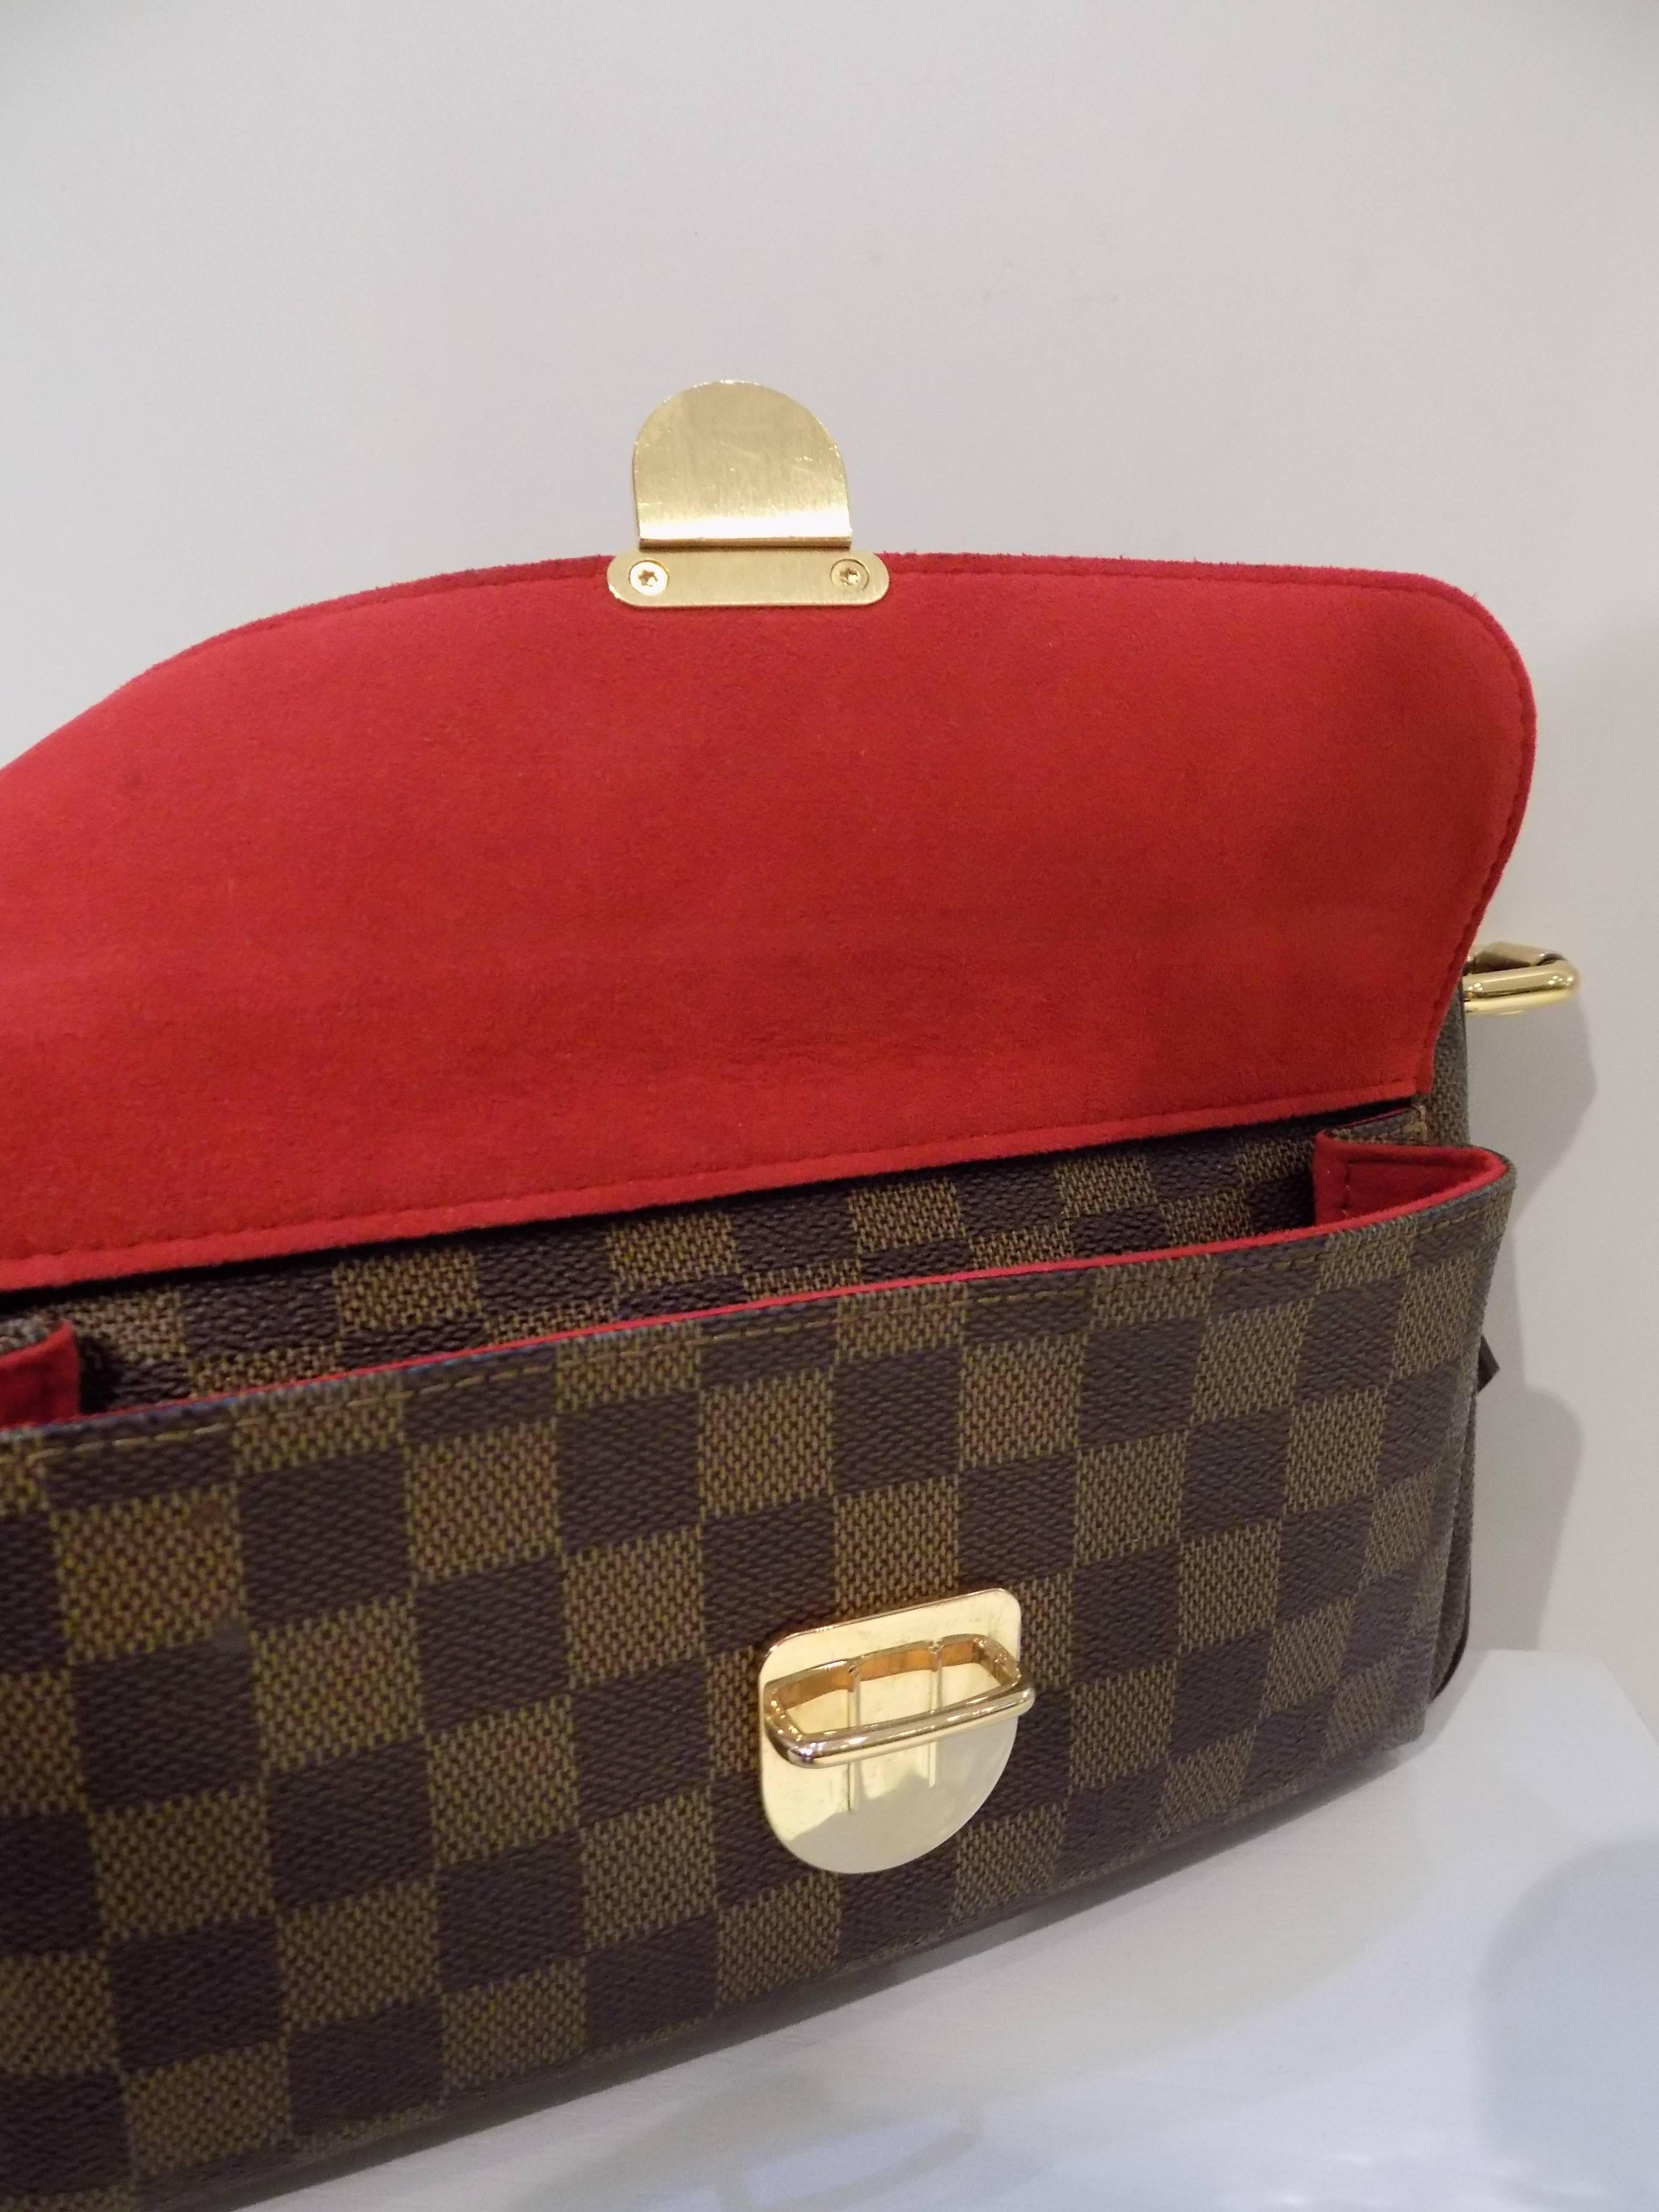 Louis Vuitton Ravello GM shoulder bag in Damier Canvas. Outside, it has 1 small pocket with flap and brass lock. Top is secured with zipper. Inside is in red alkantra lining with 1 open pocket. Comforably carried in hand or on shoulder.

Made in: